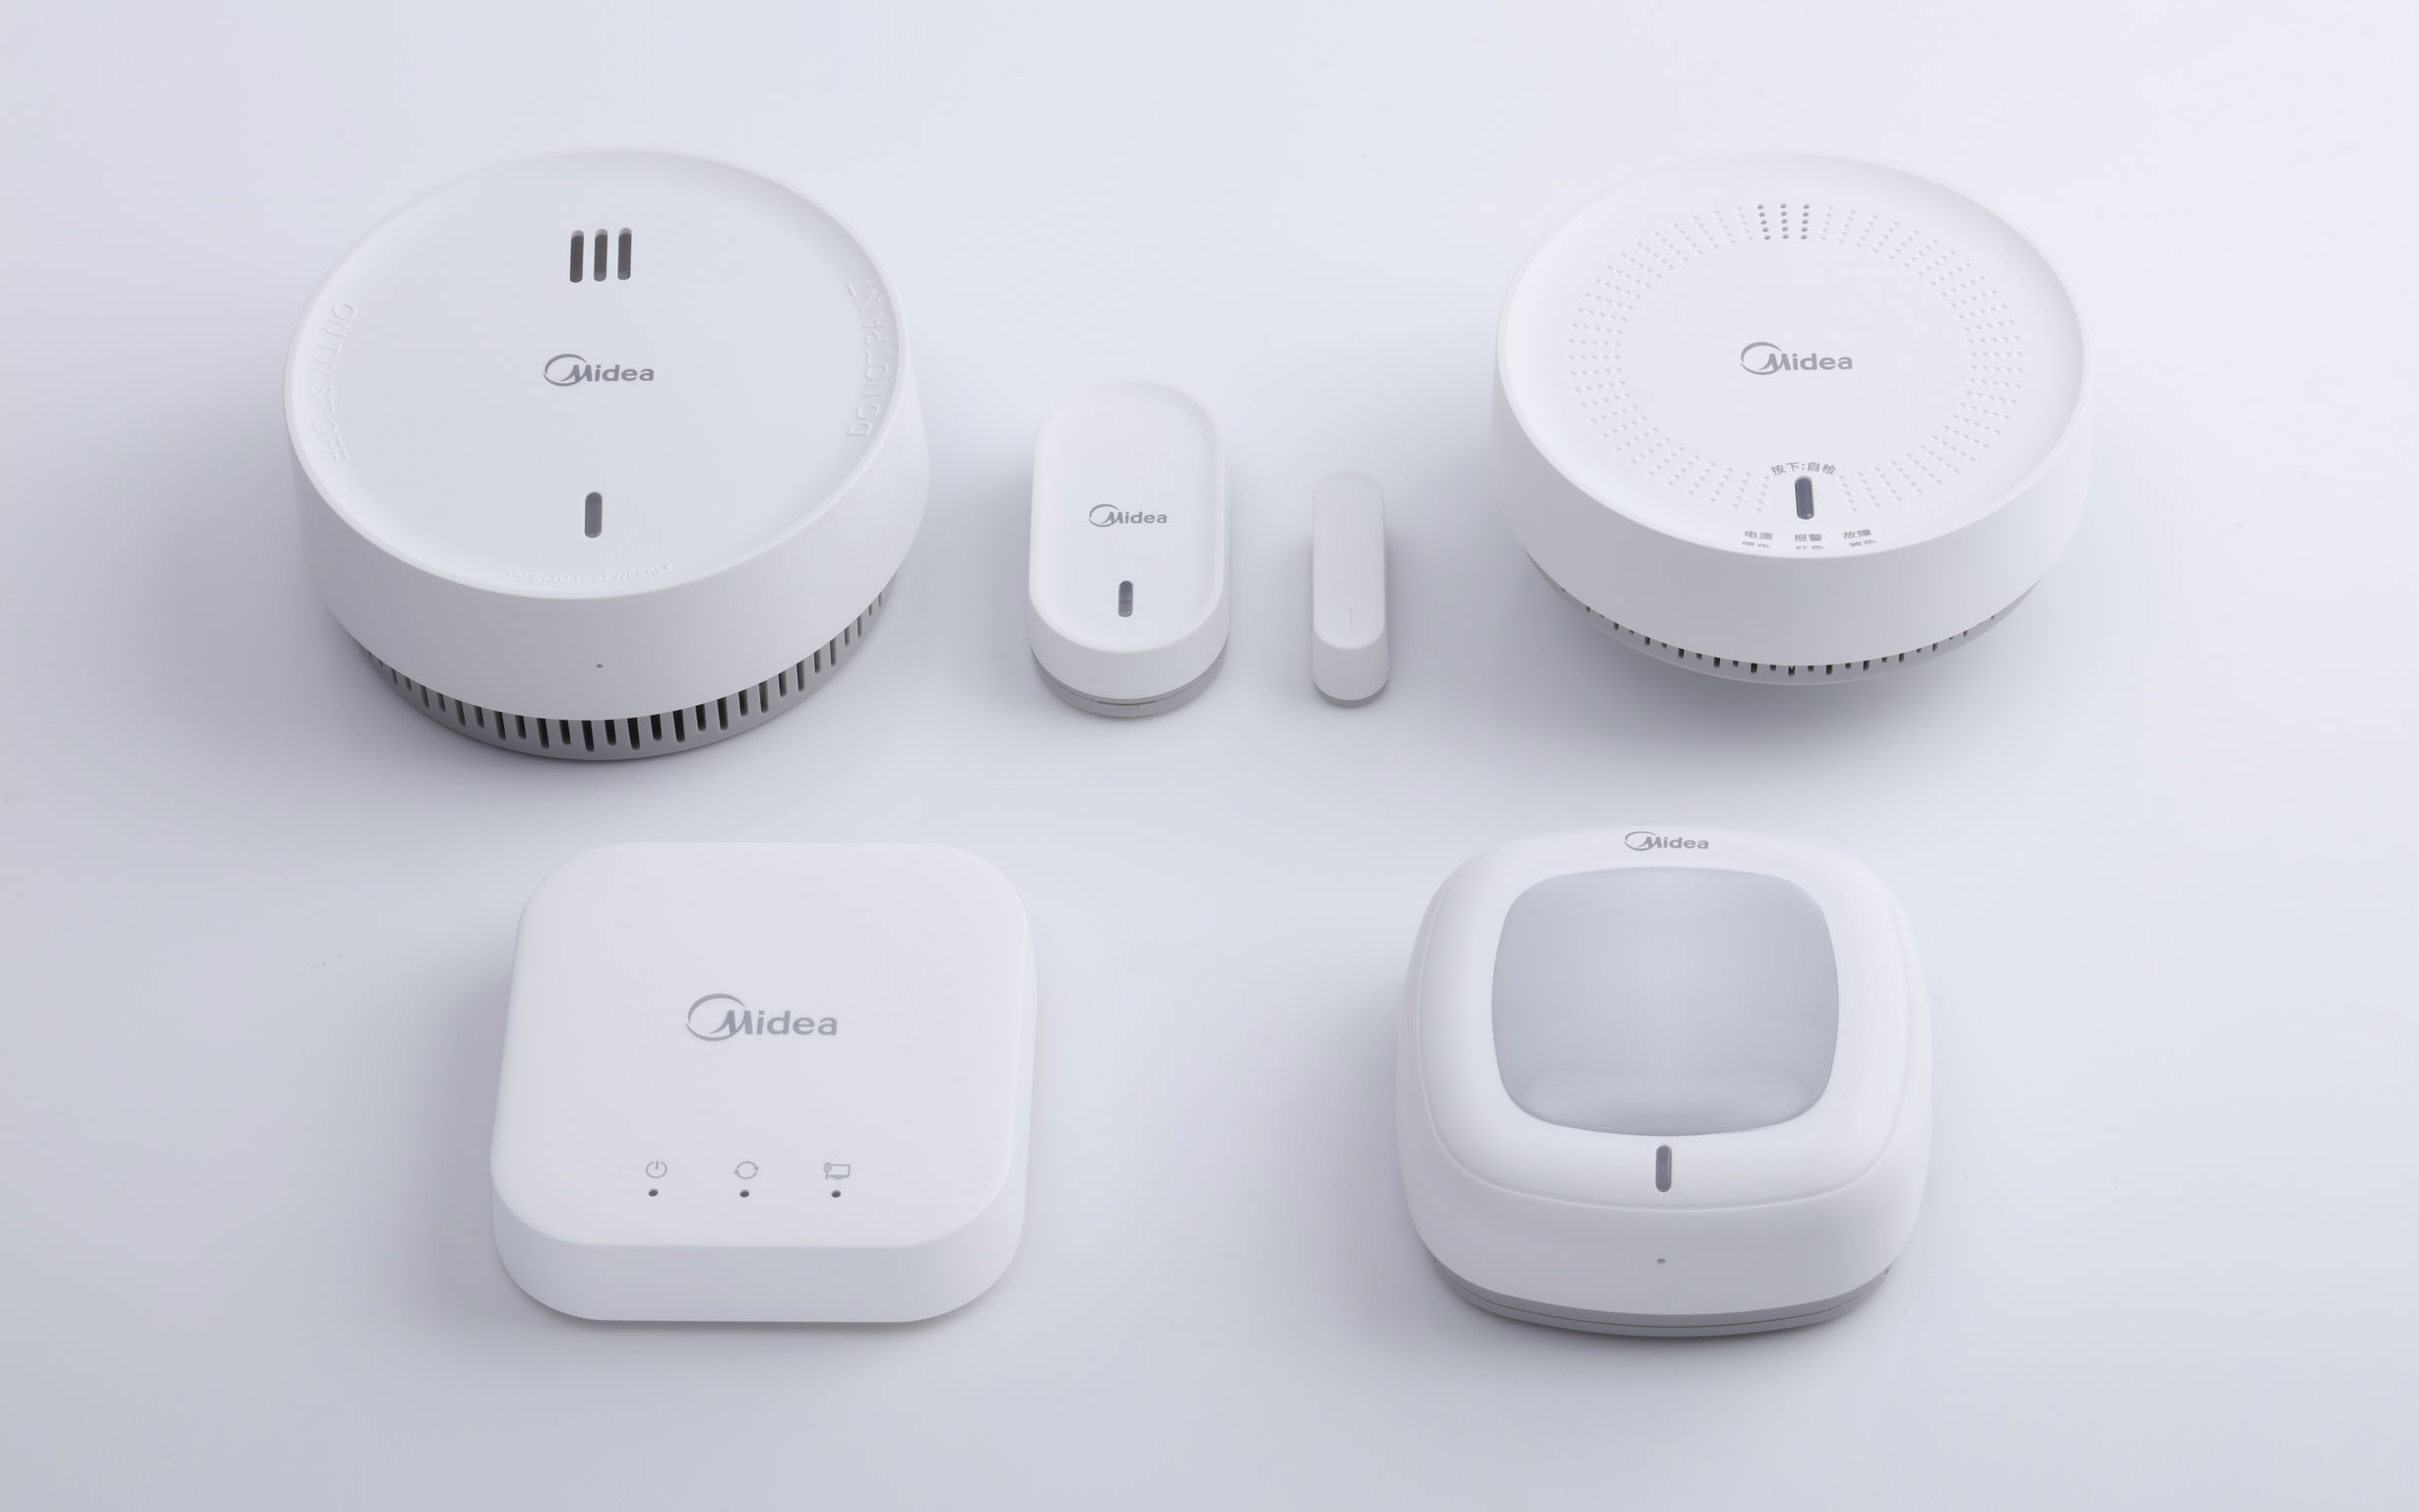 Midea Smart Home  Products  Entry iF WORLD DESIGN  GUIDE